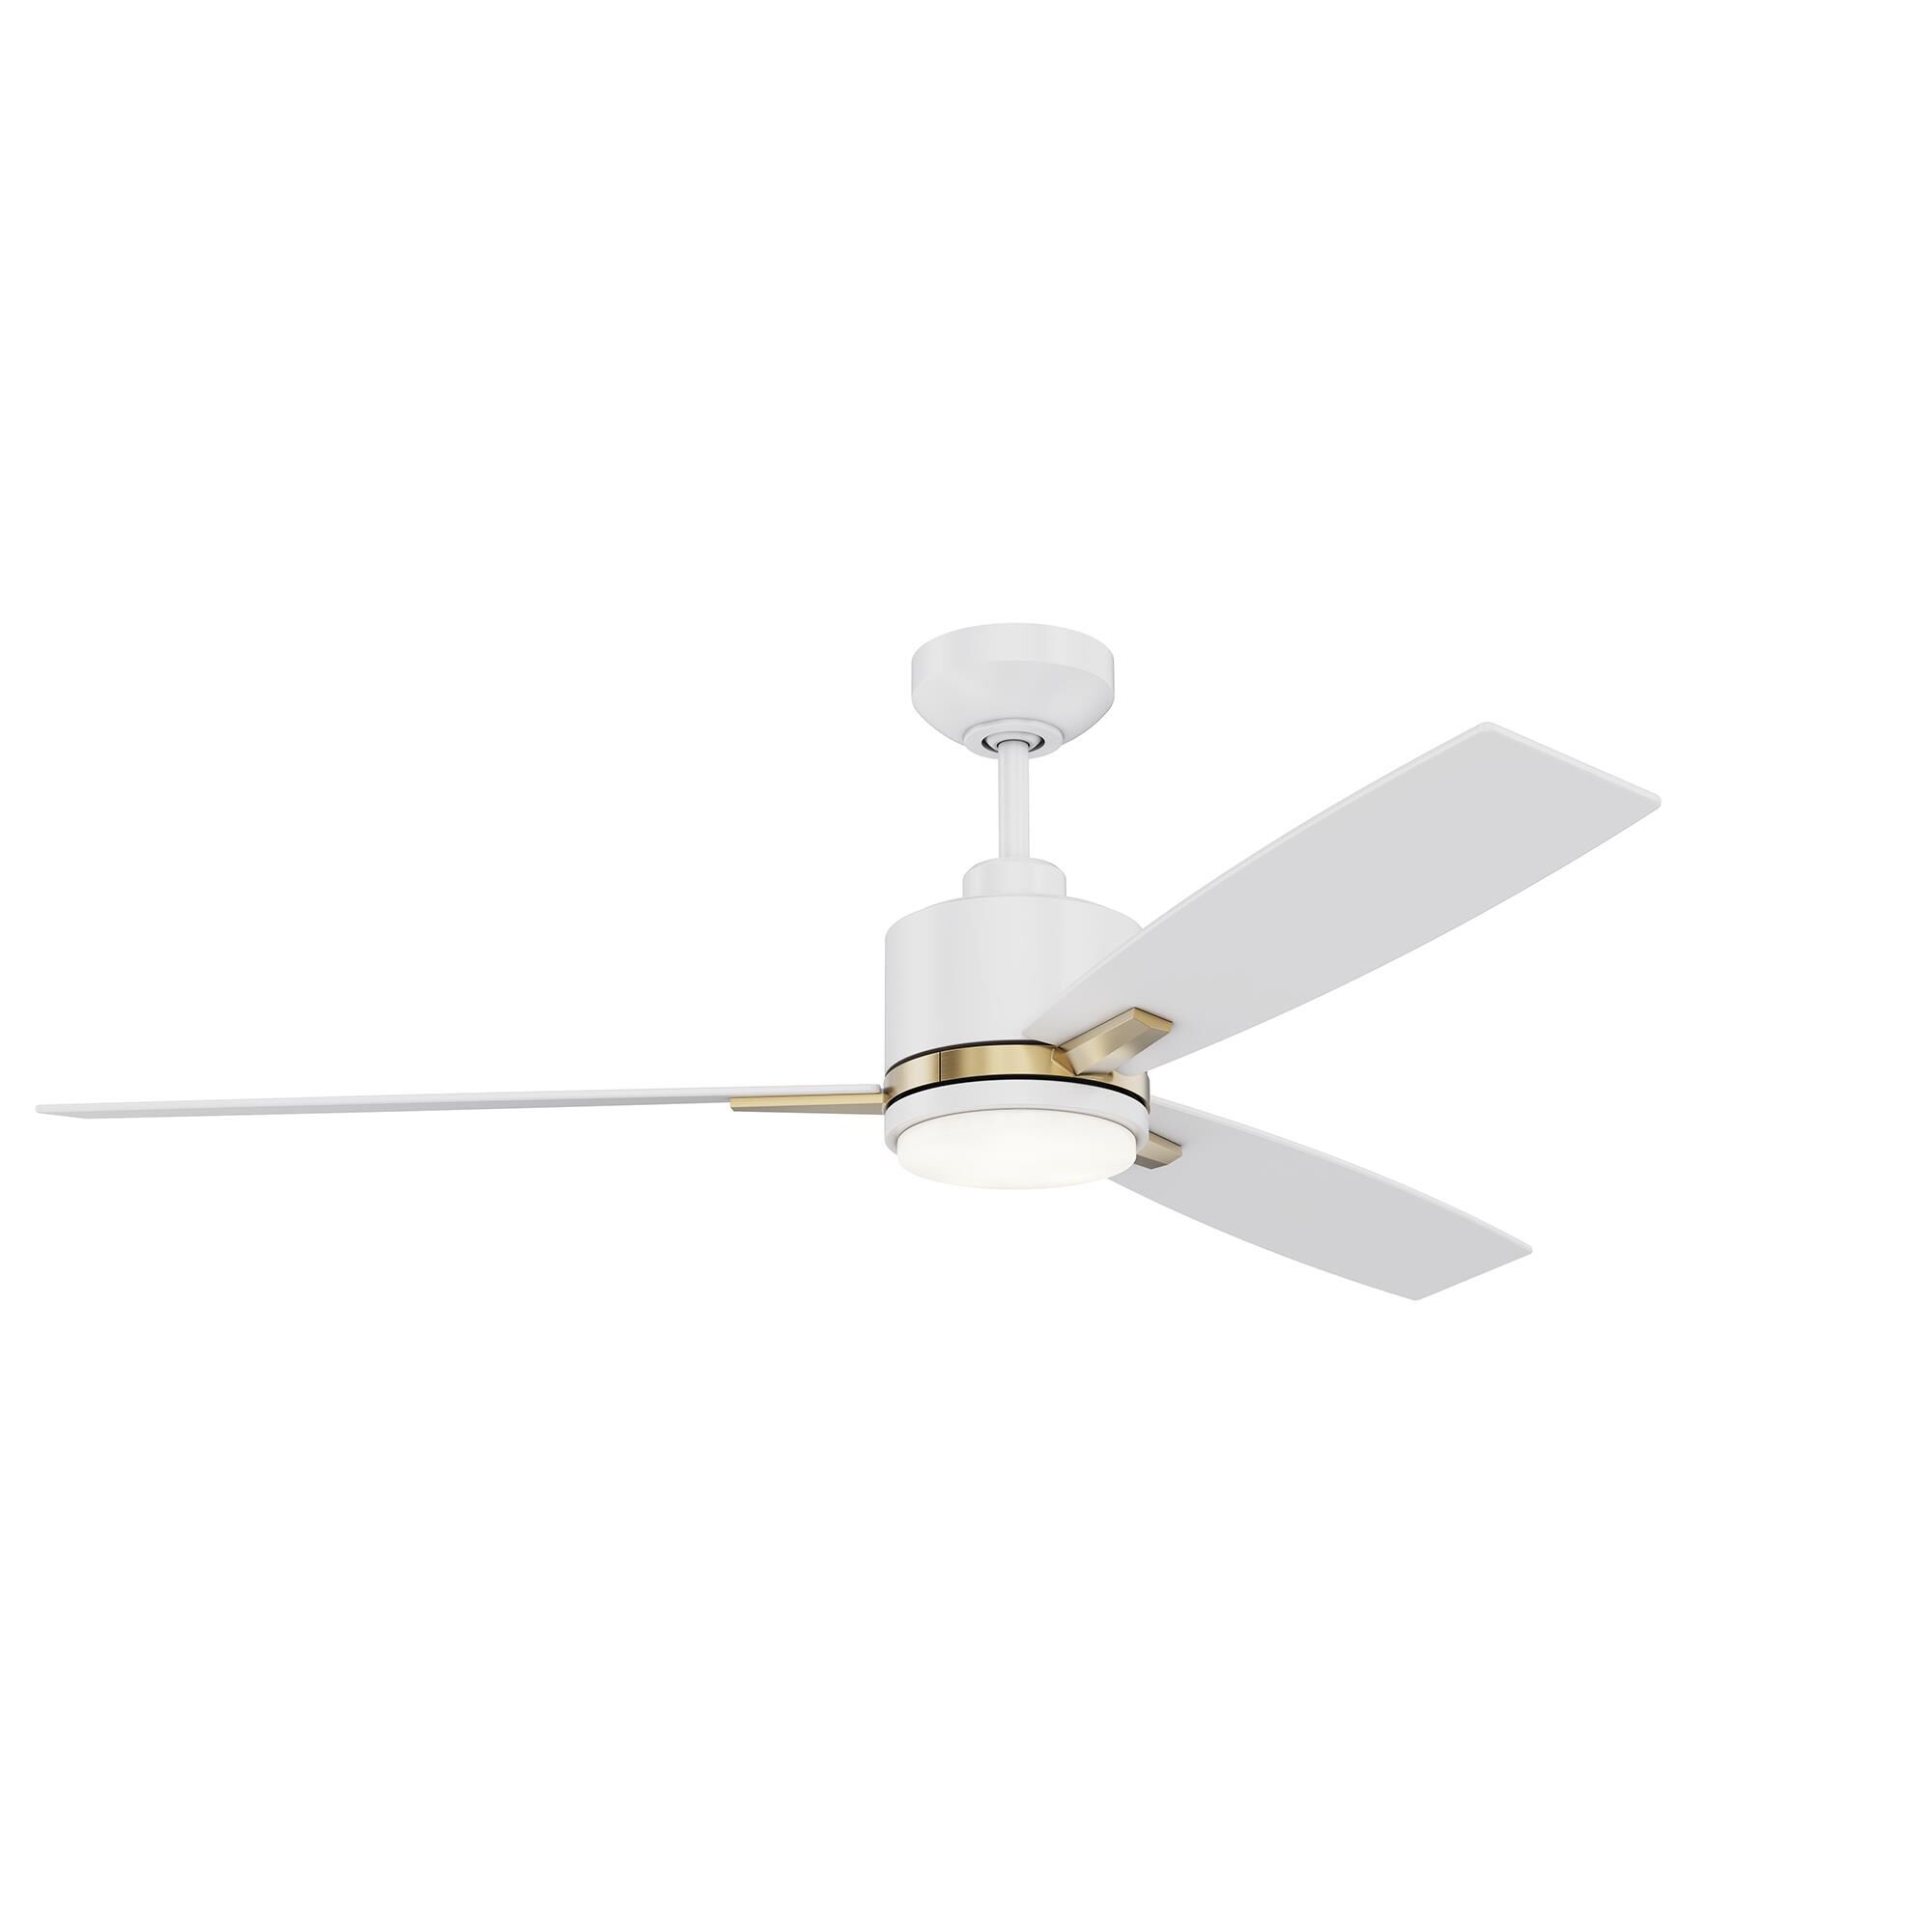 Photos - Fan Kendal Lighting Nuvel 52 Inch Ceiling  with Light Kit Nuvel - AC30852-M